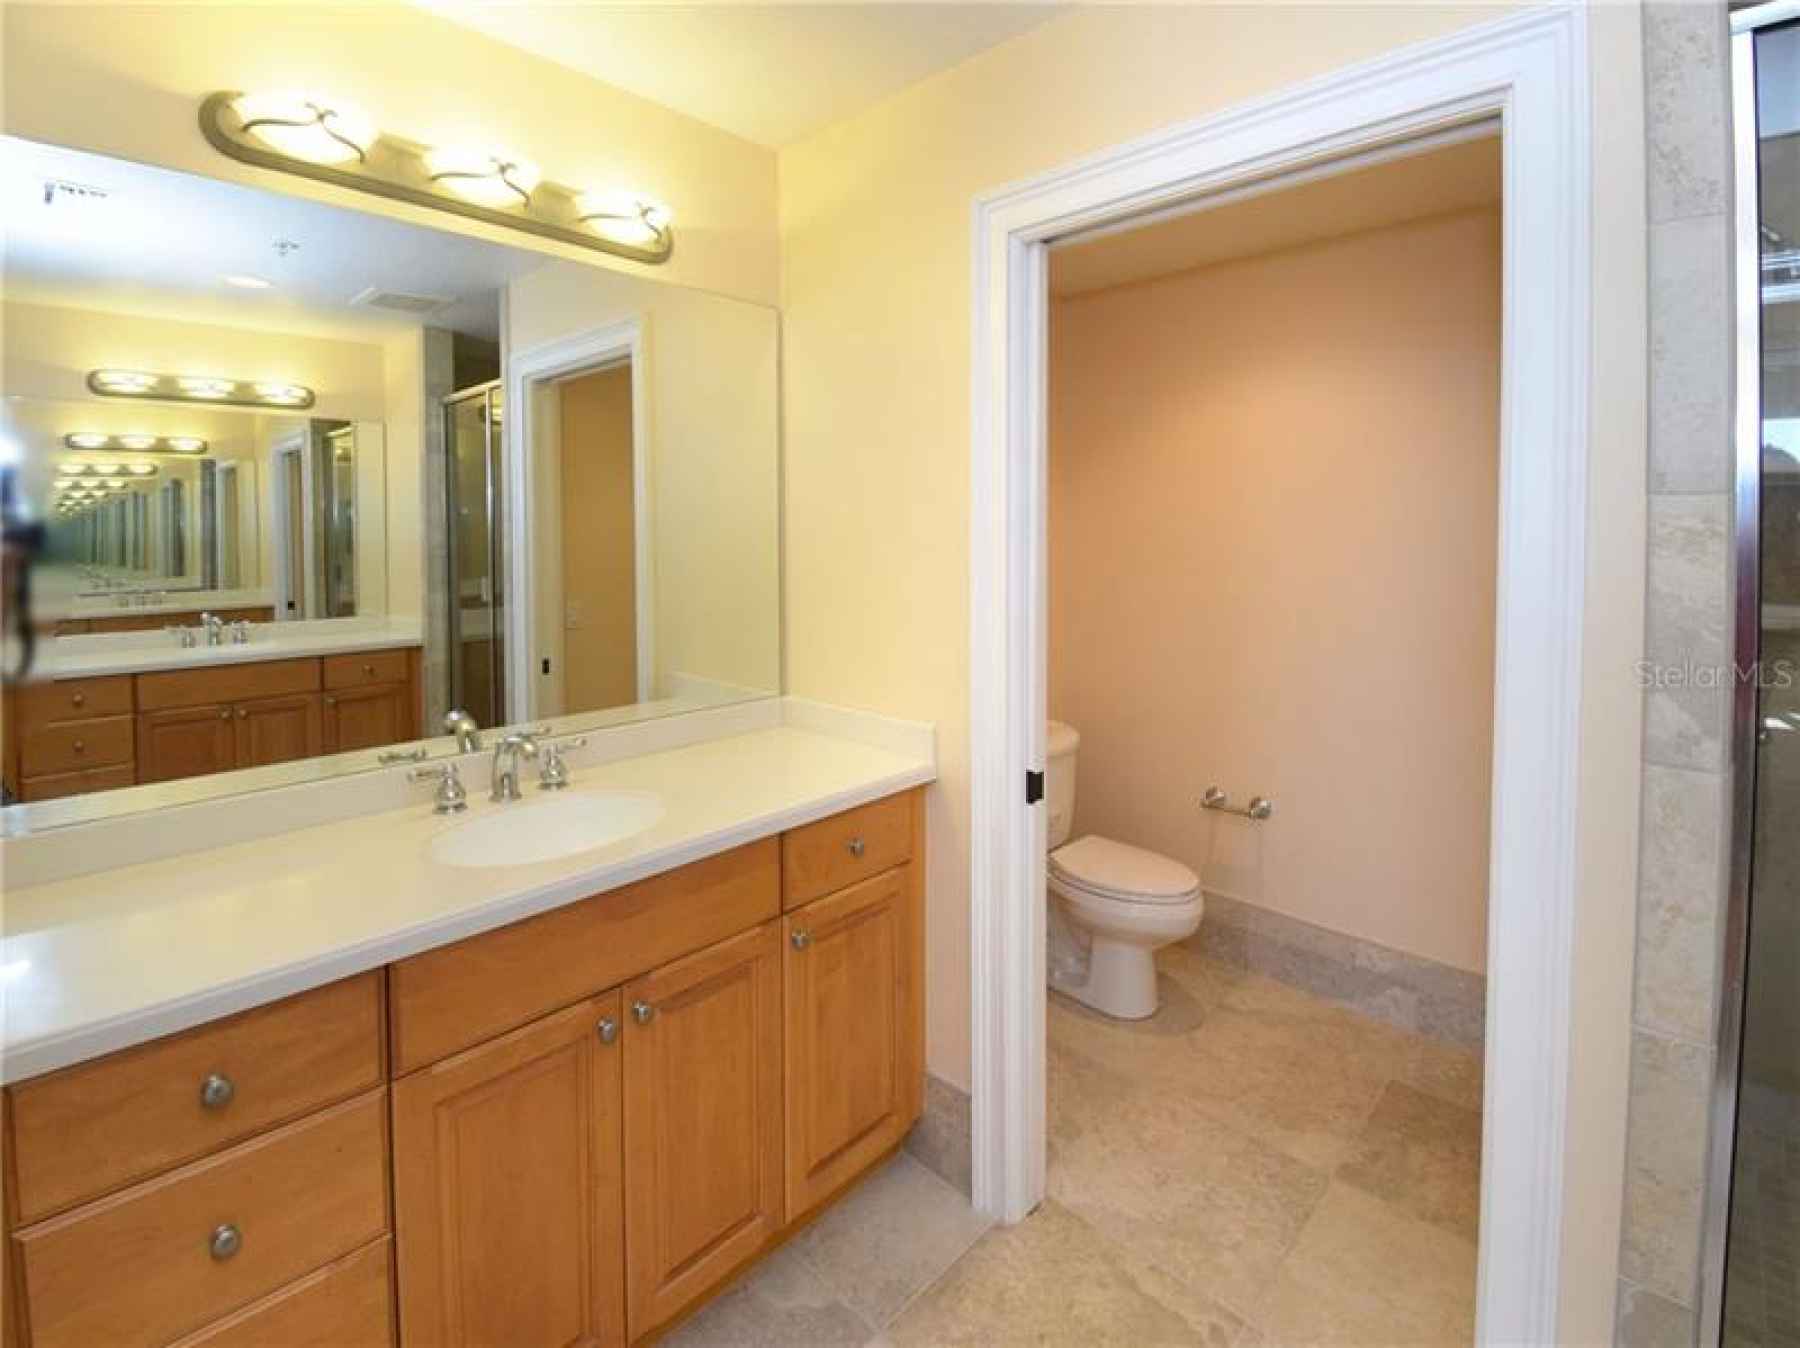 Master bath with dual vanities with Corian countertops, and water closet.